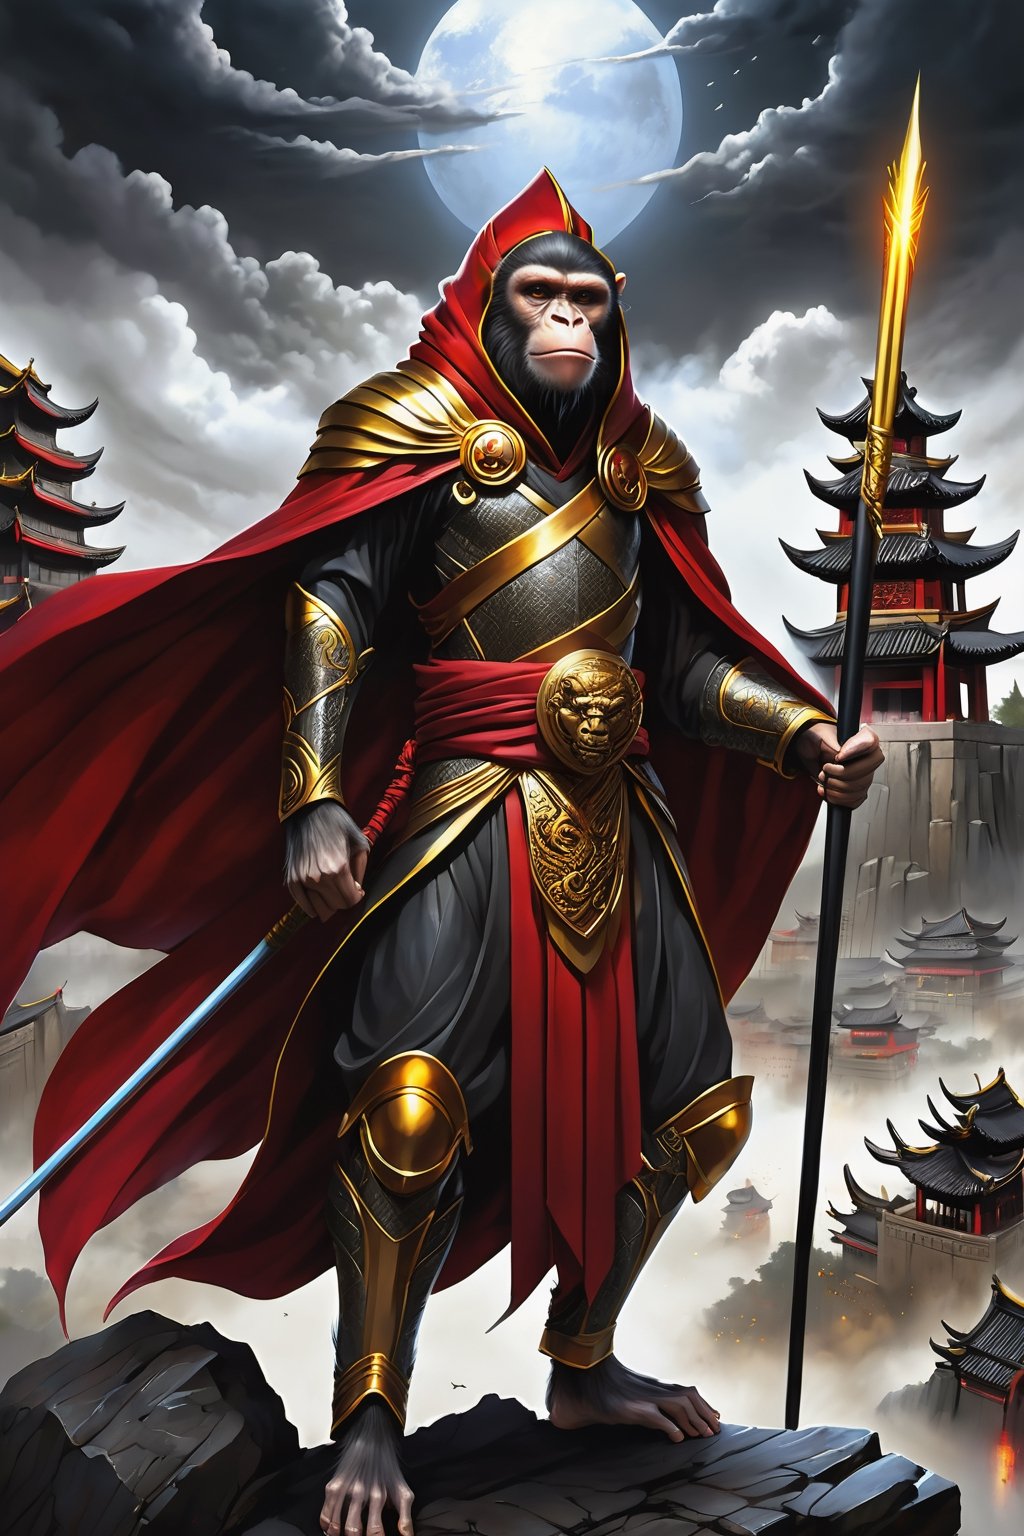 a man  Mythical hero Monkey-like features Playful yet serious expression Humanoid figure Expressive facial features Mystical aura Iconic headband Tail  
Ancient city Ultra-fine painting
Black armor
Red cloak
Fierce expression
Yellow metal staff
Indomitable will
Invincible aura
Lonely guardian
Warring States, Three Kingdoms style
Aerial view
Ferocious face
Sharp eyes
Fluttering armor and cloak
Ruined ancient city
Desolate atmosphere
Central figure
Dark sky
Dark, gray, brown tones Red and gold highlights


3D Realistic Style Highly detailed 4k, 8k, highres: 4K, 8K
Realistic, photorealistic, photo-realistic, in the style of esao andrews,DonM3lv3nM4g1cXL,LegendDarkFantasy